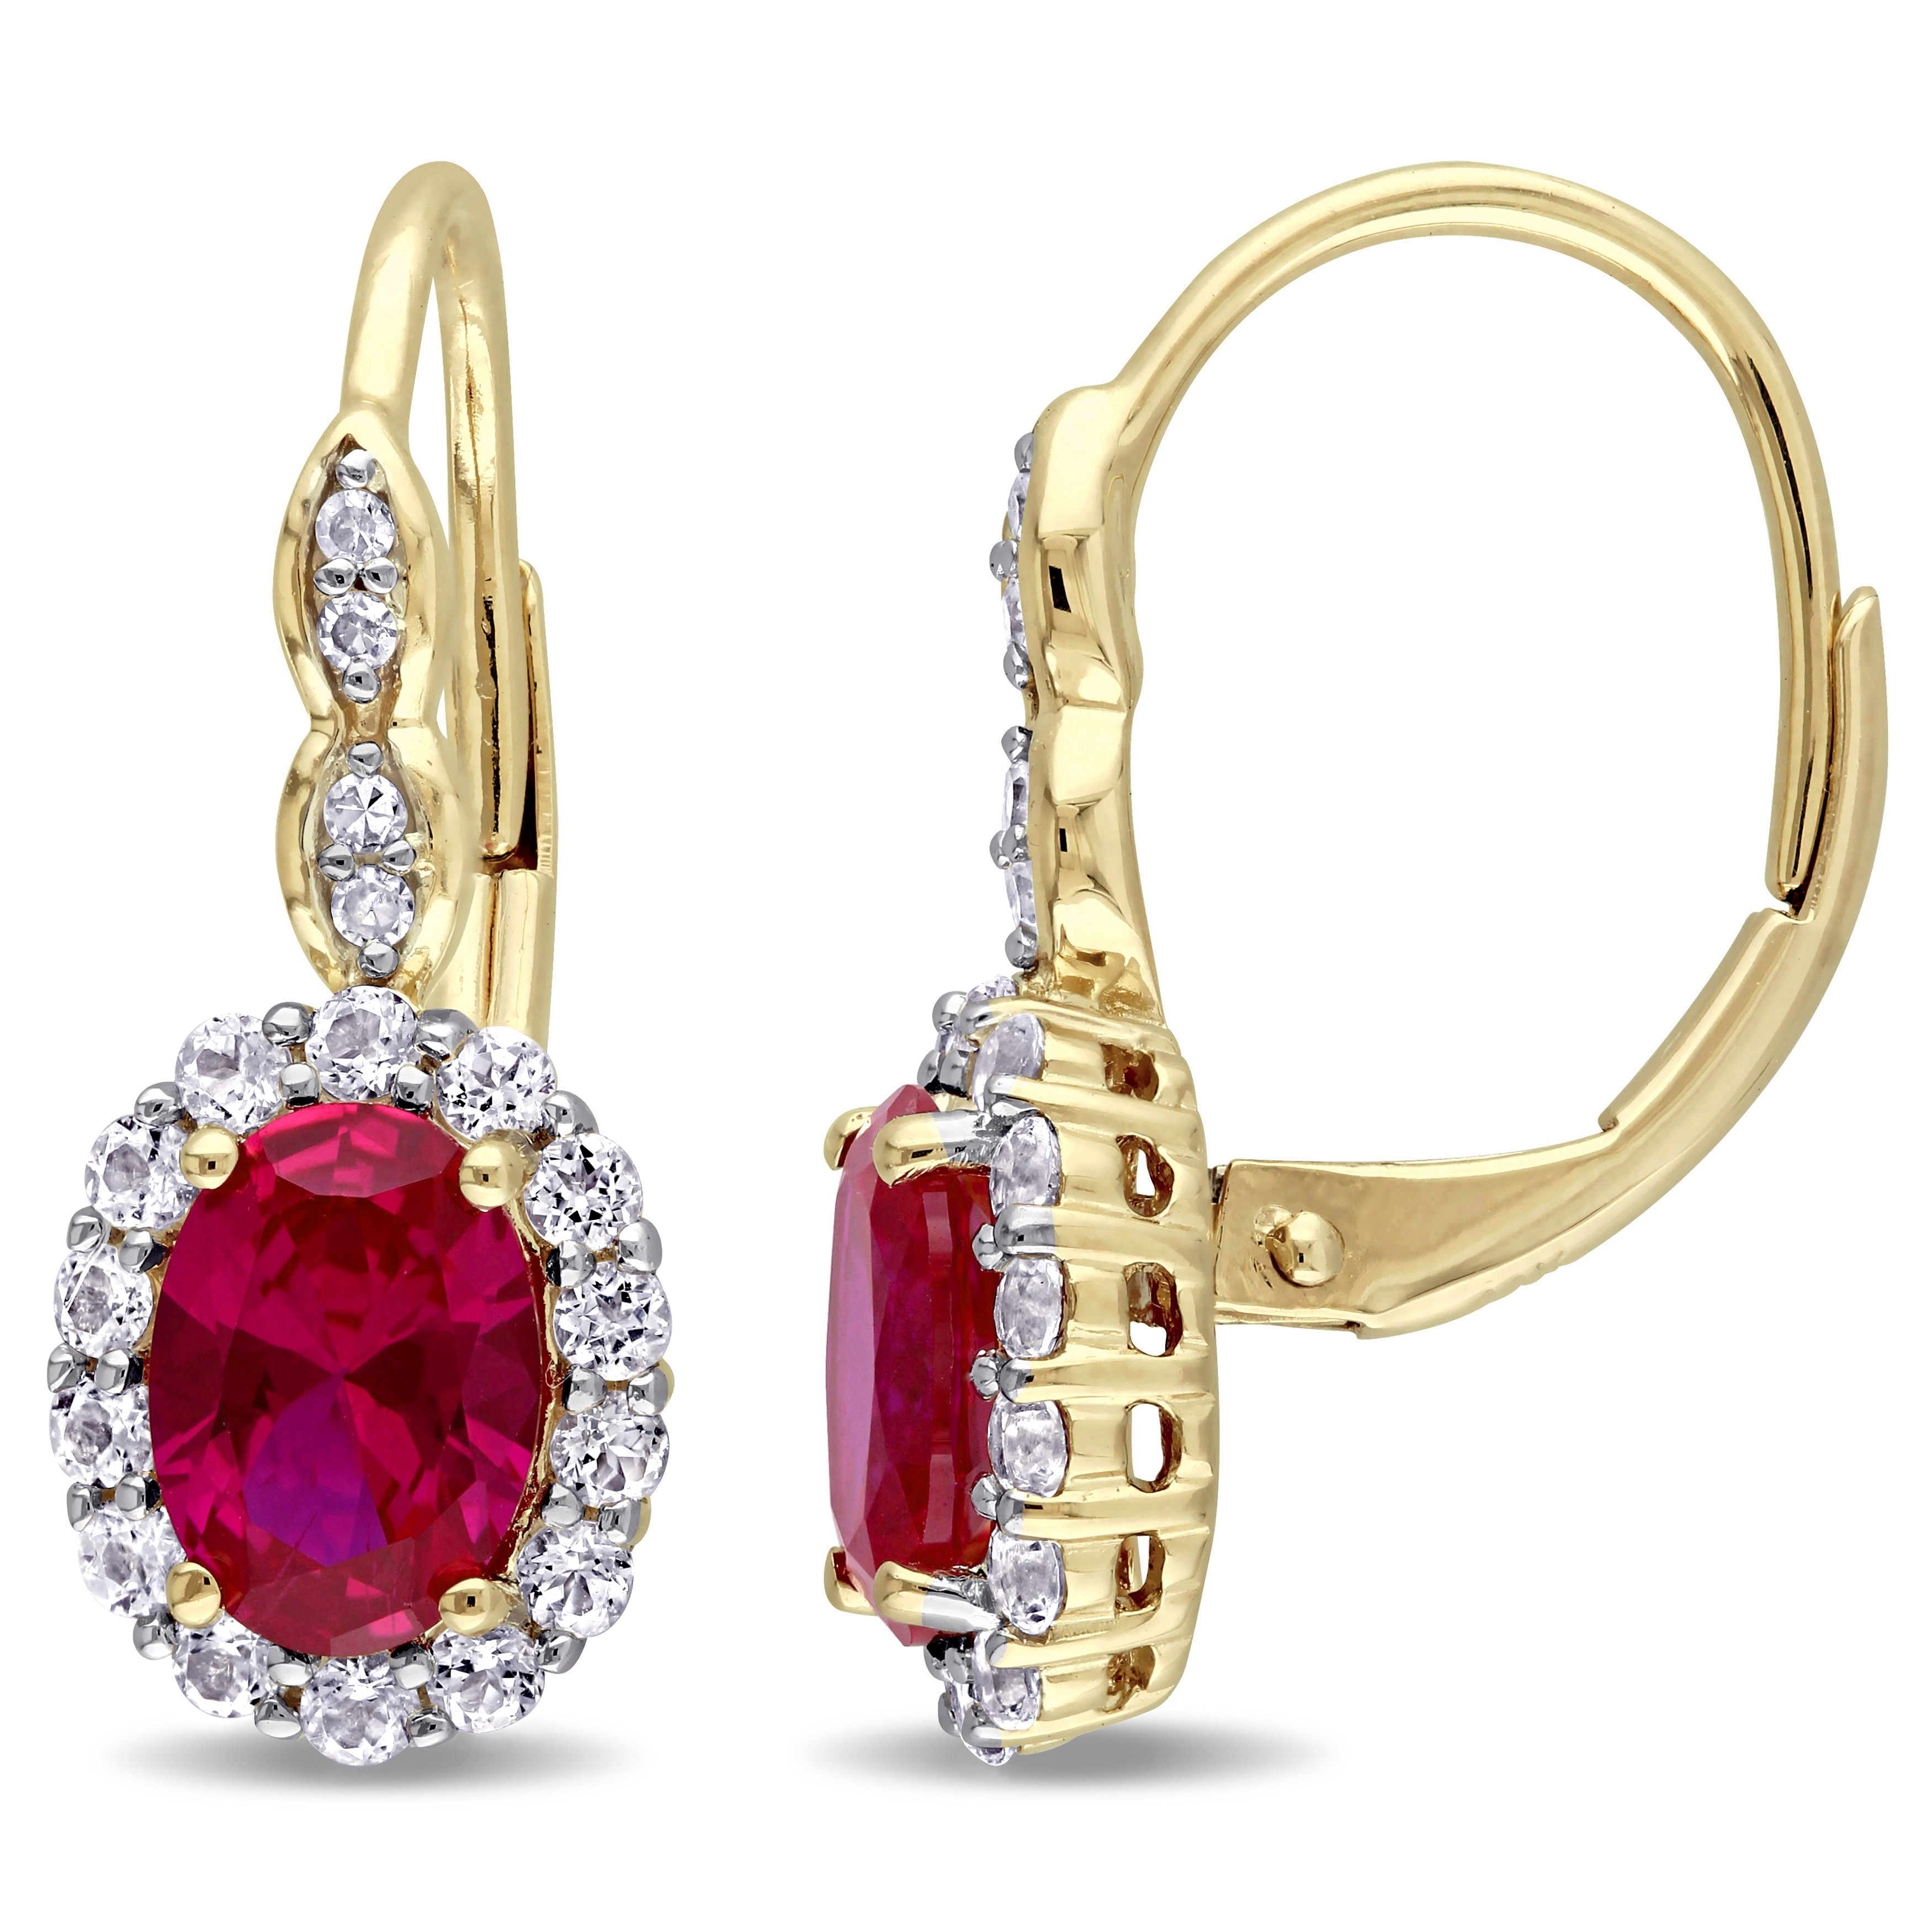 3 3/8 CT TGW Oval Shape Created Ruby, White Topaz and Diamond Accent Vintage LeverBack Earrings in 14k Yellow Gold